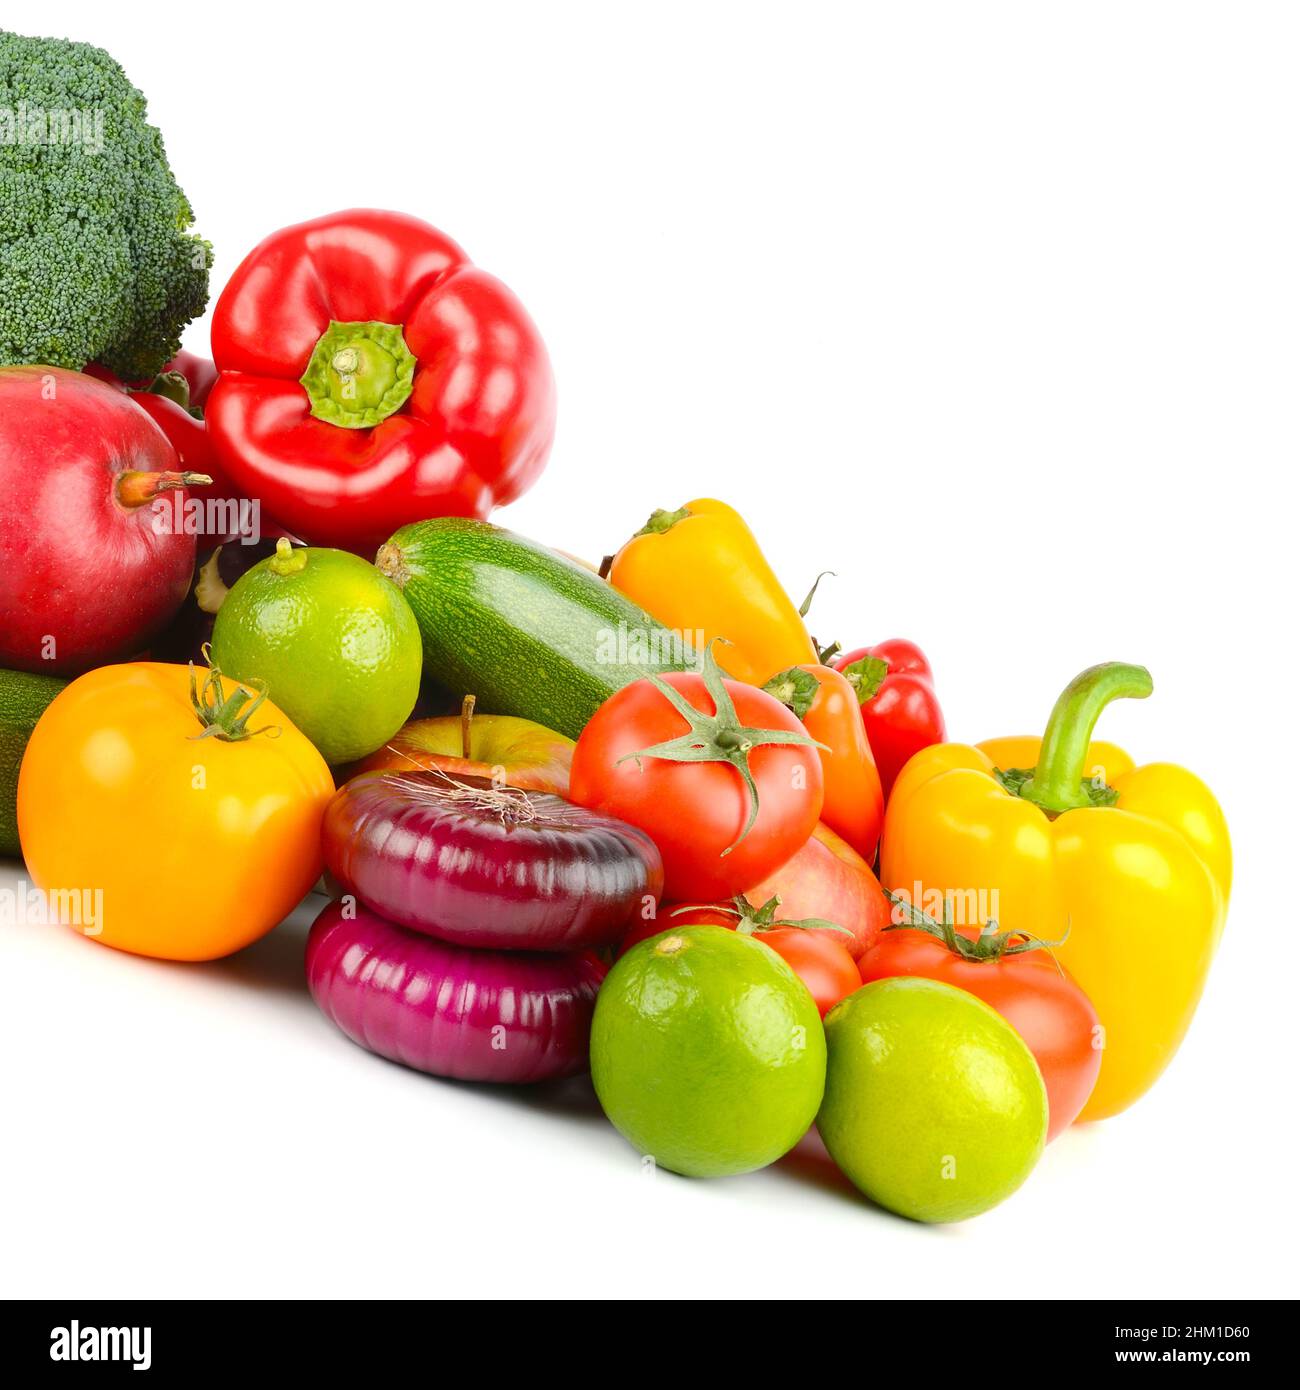 Useful and fresh vegetables and fruits isolated on white background. Stock Photo